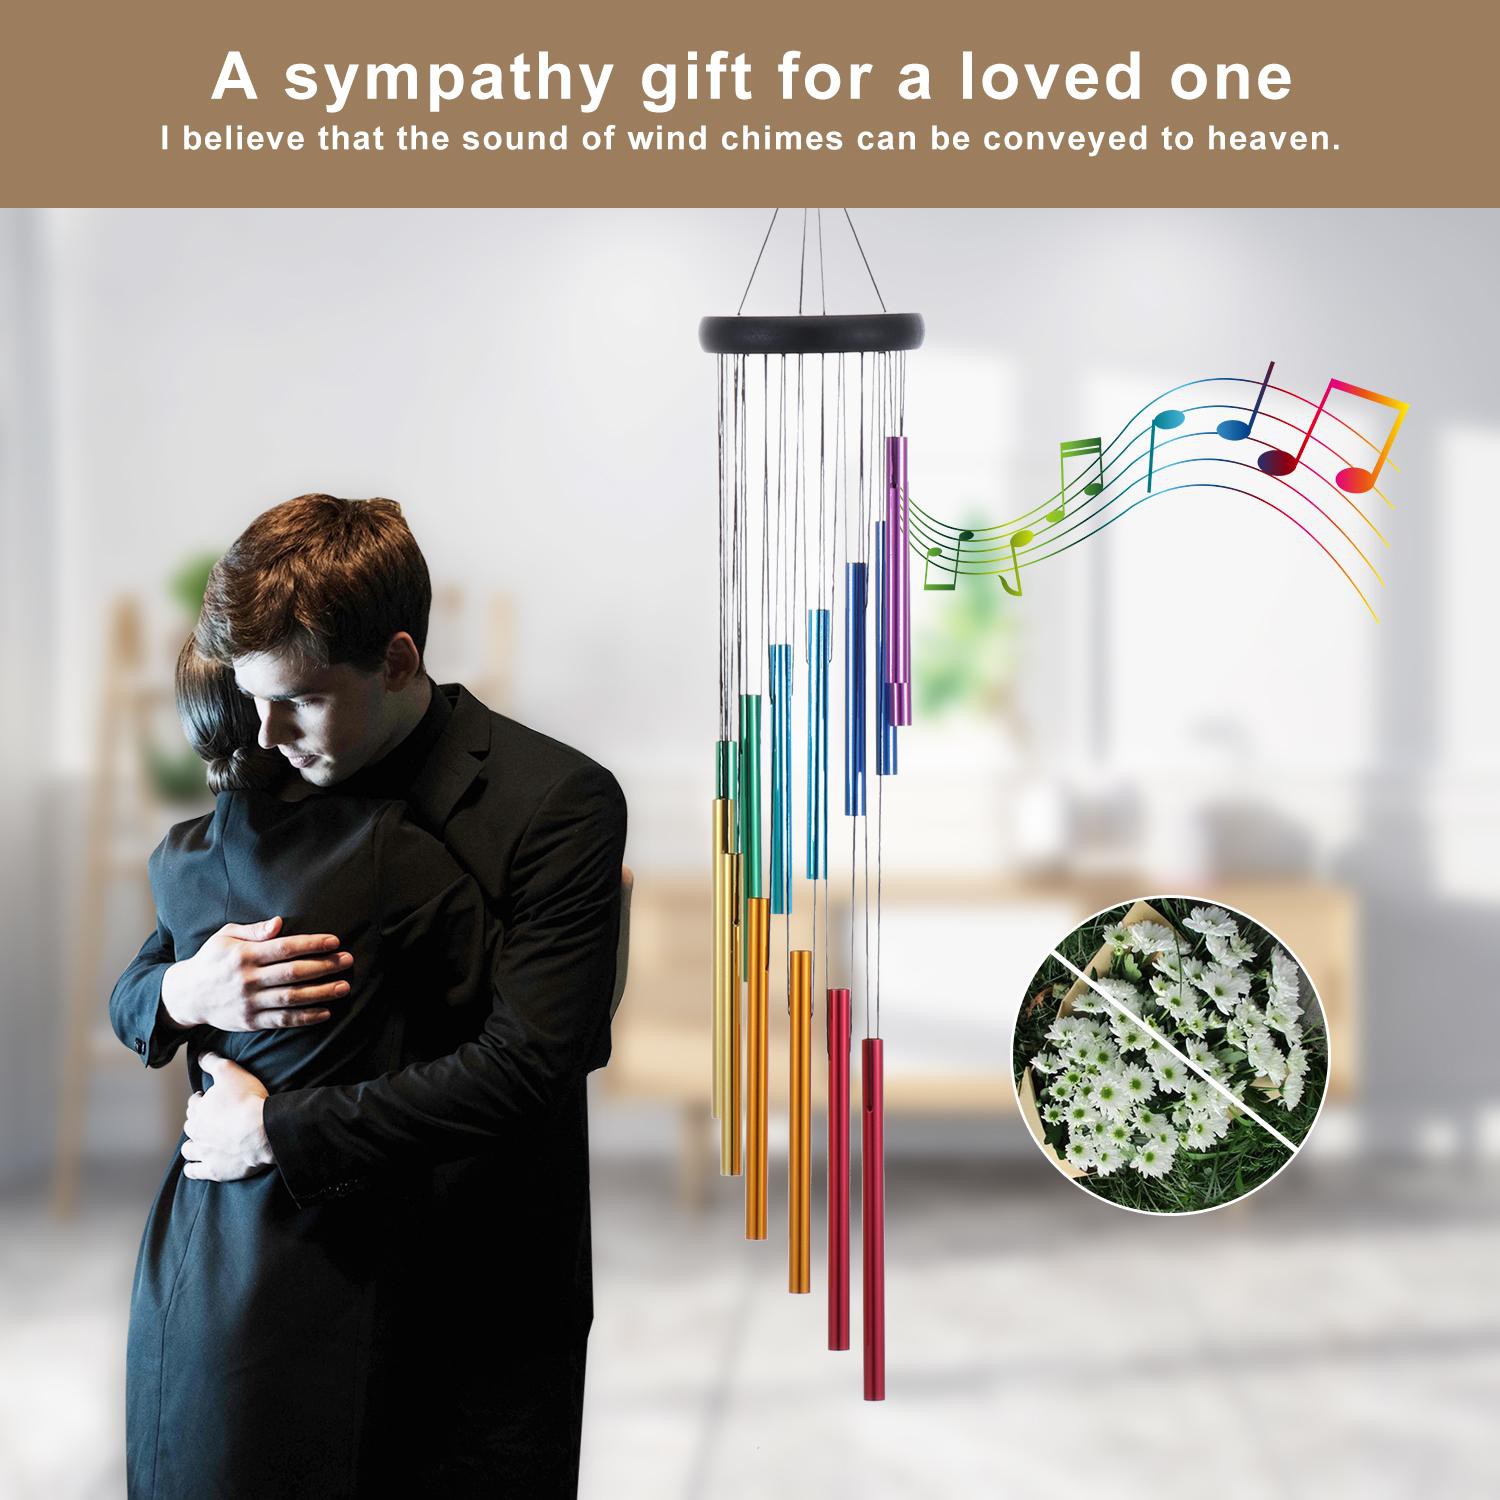 RAINBOW Outdoor Garden Colorful Wind Chimes Memorial Wind Chimes Gifts Meditation and Yoga Deep Tone Wind Chimes With Colored Aluminum Alloy Tubes Terrace decorations 7 Colors Home Decorations 14 Aluminum Tubes Decor Garden Soothing Sounds